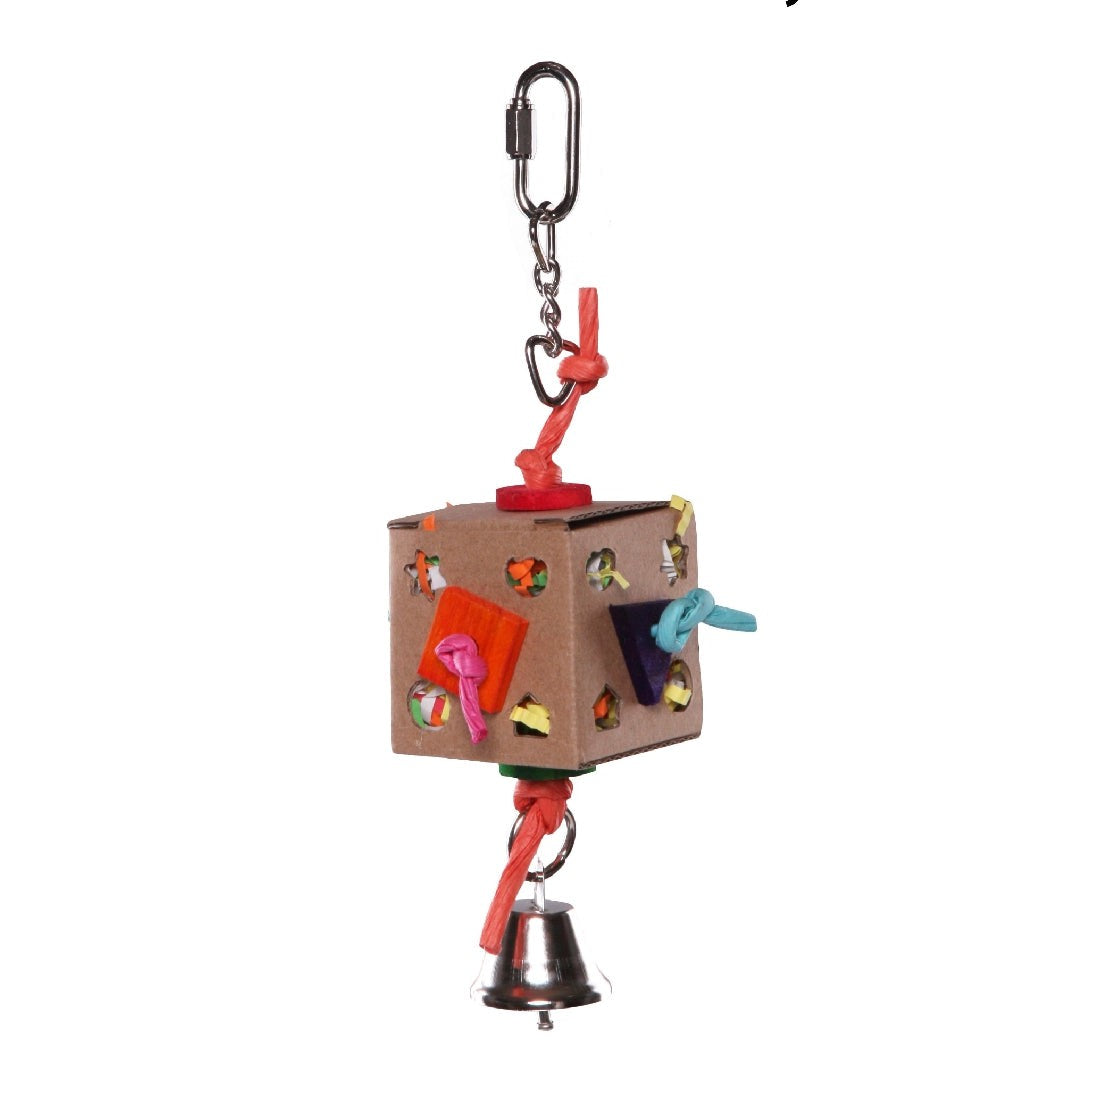 Alt text: Bird toy with chain, cardboard, colorful knots, and bell.